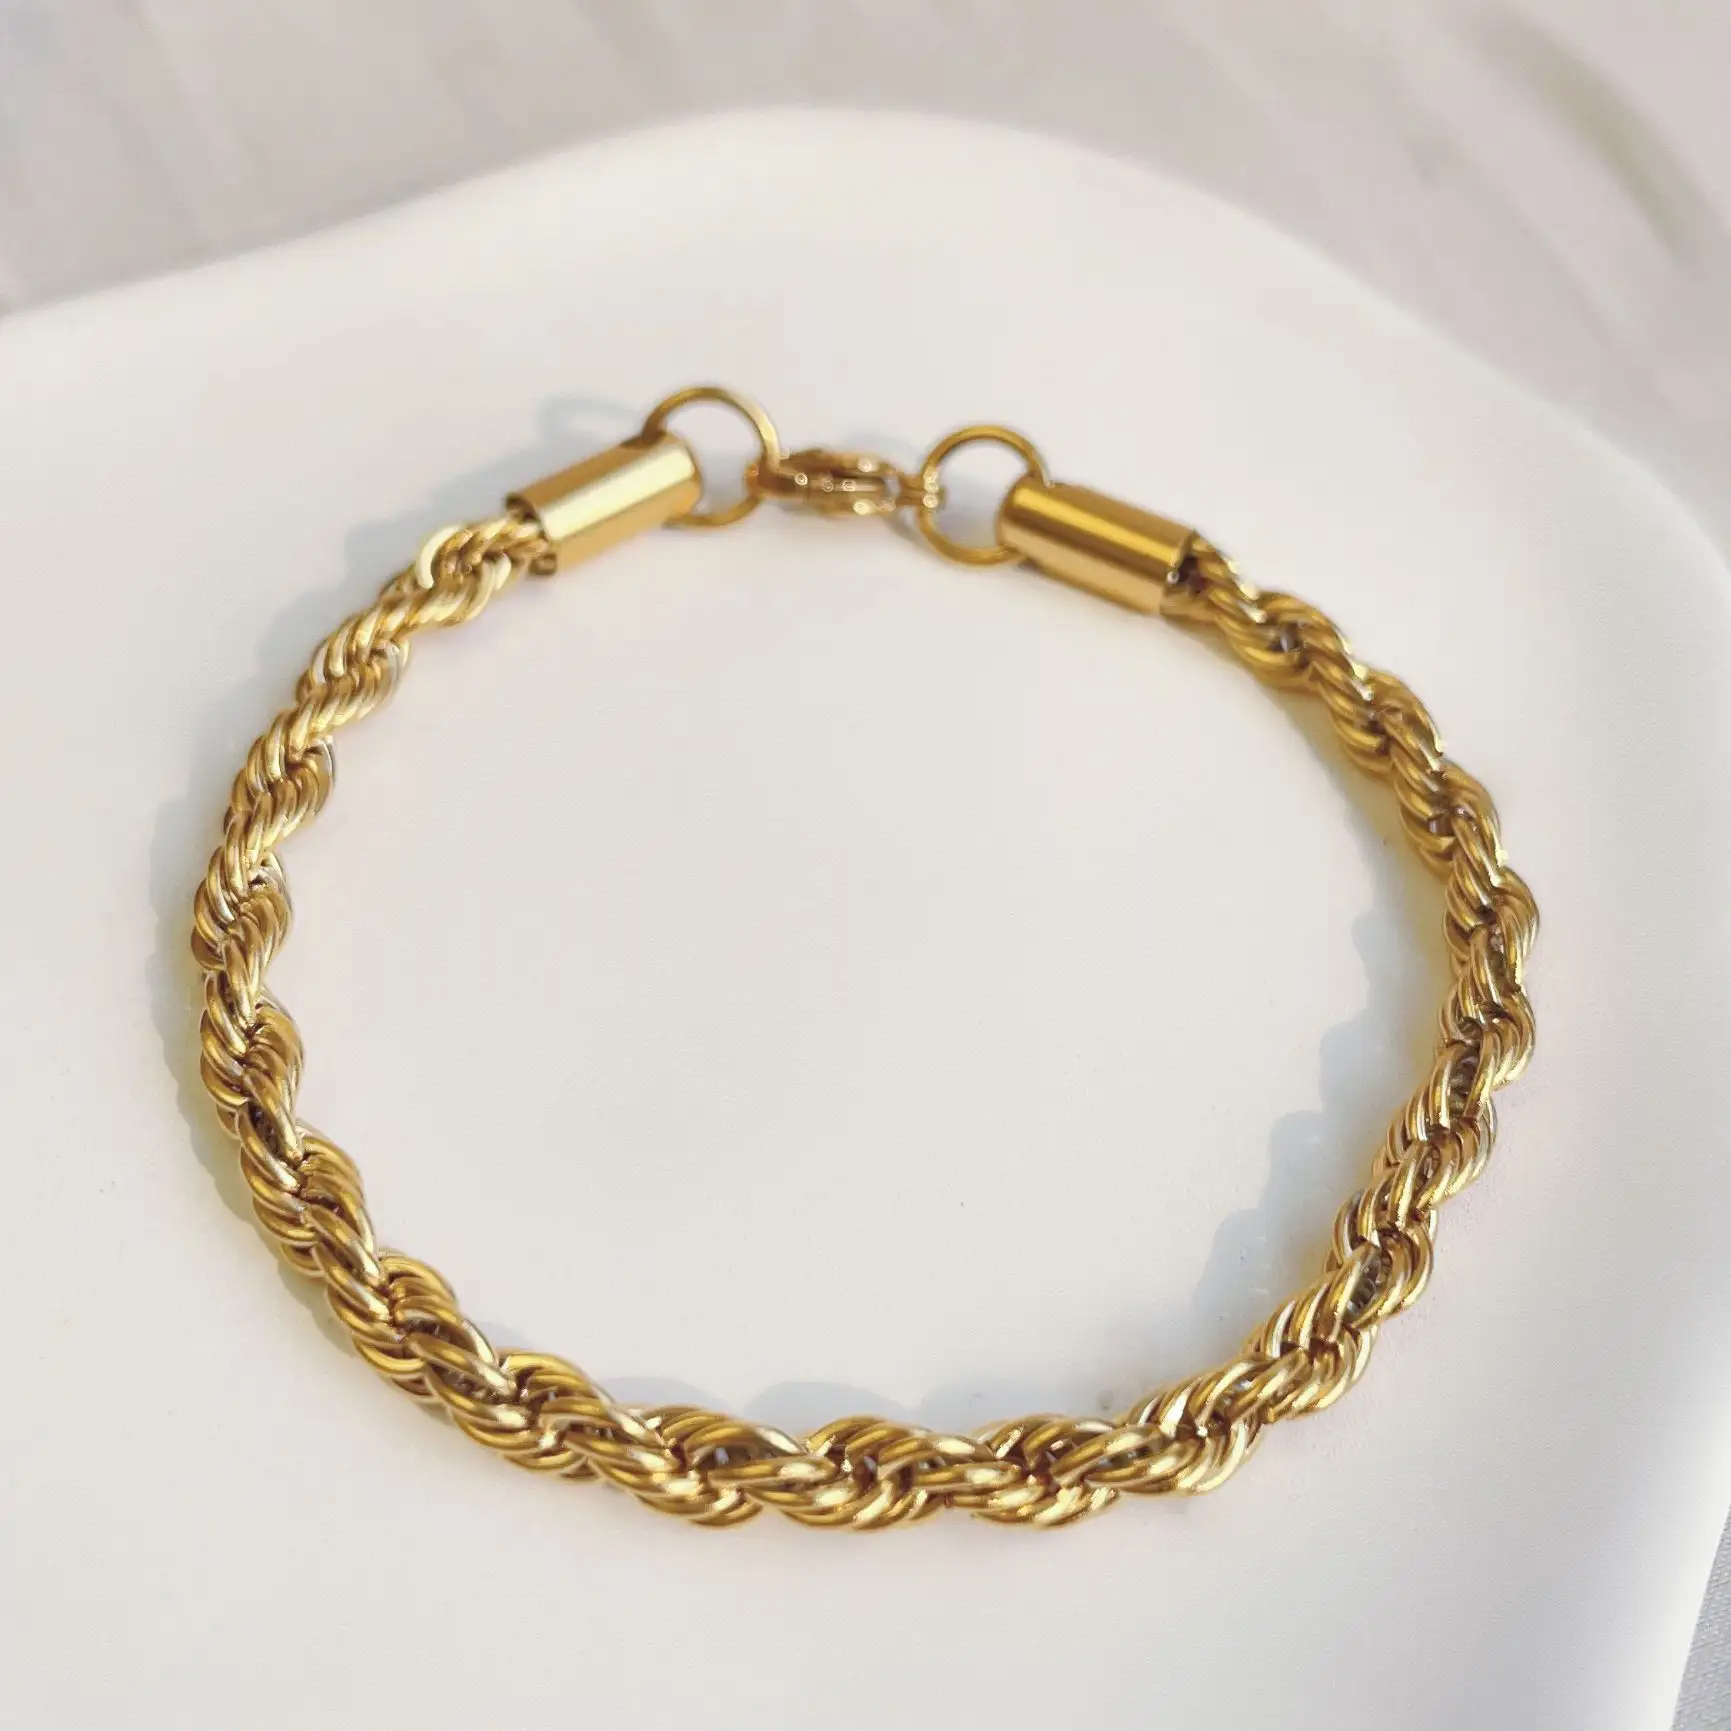 Wholesale 2-5mm Various Size Minimalist Trendy Waterproof Stainless Steel 18K Gold Plated Twist Rope Chain Bracelet for Women